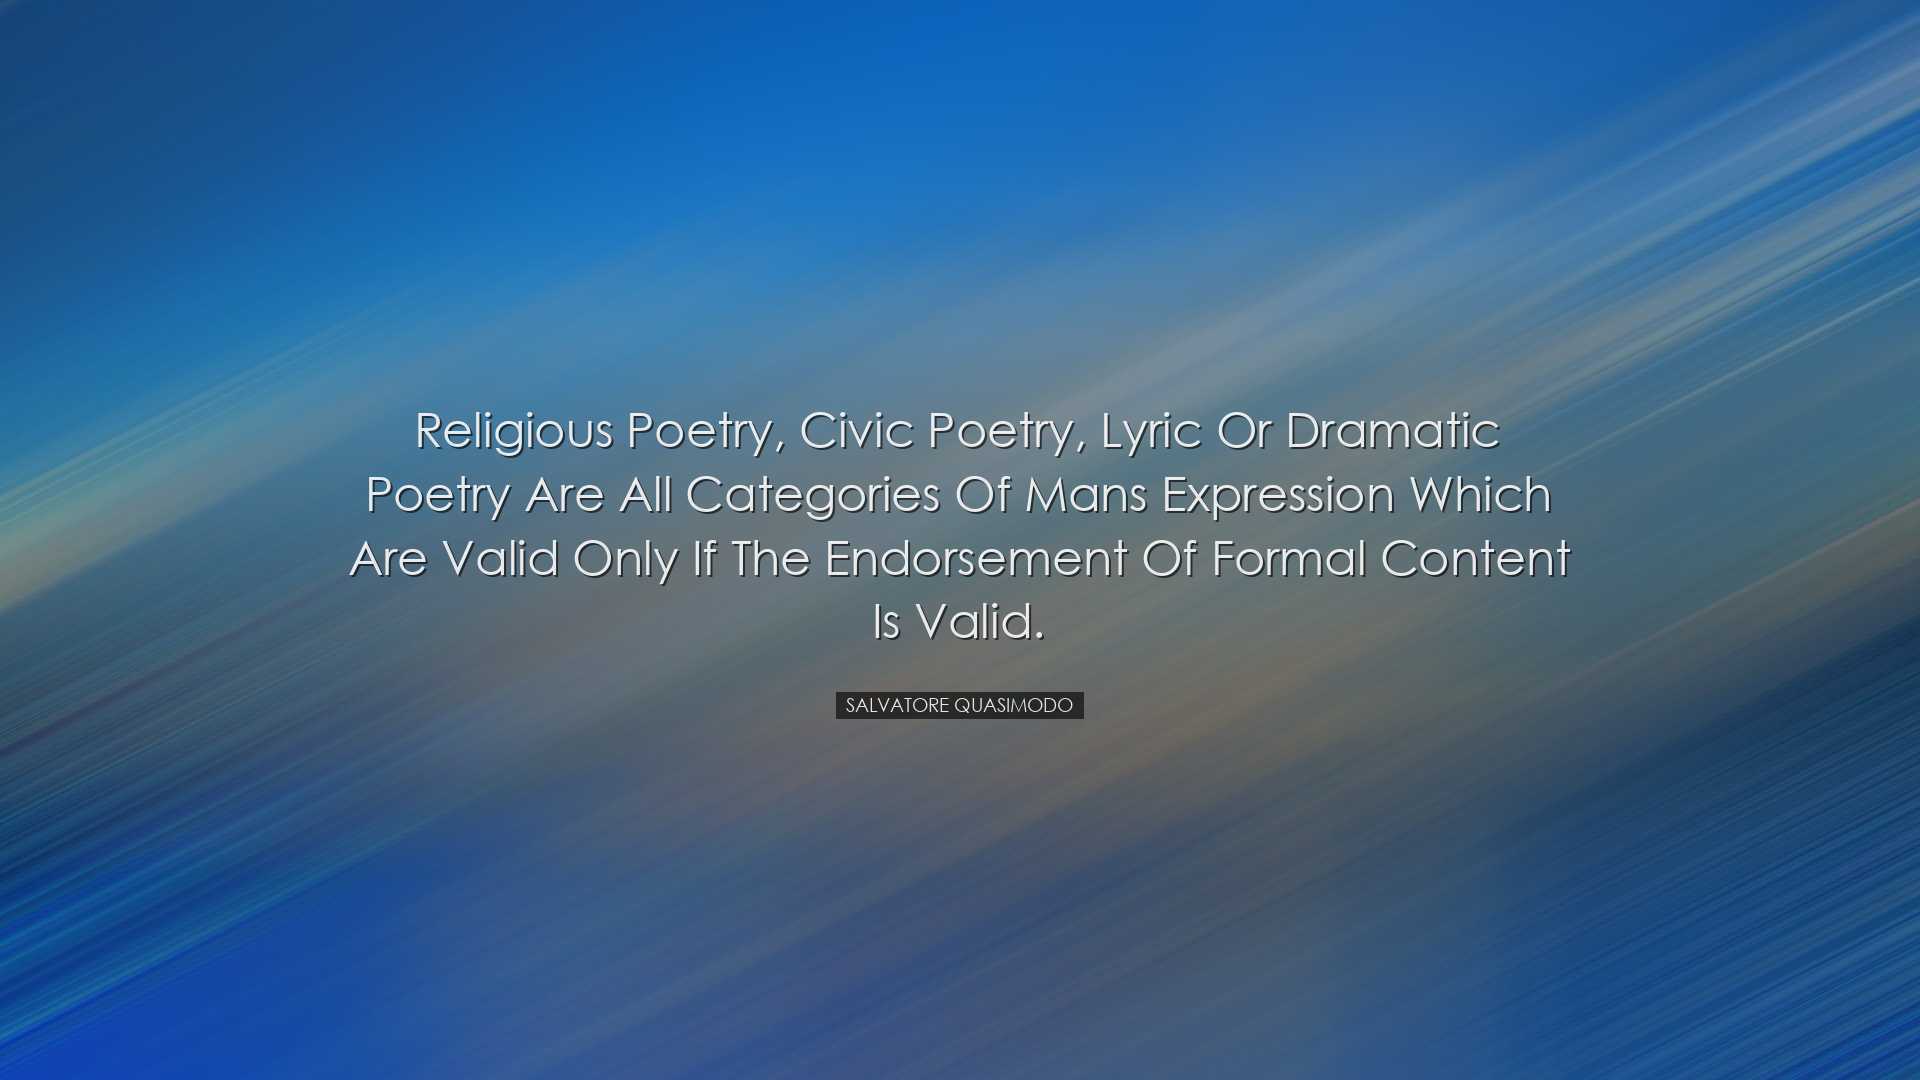 Religious poetry, civic poetry, lyric or dramatic poetry are all c